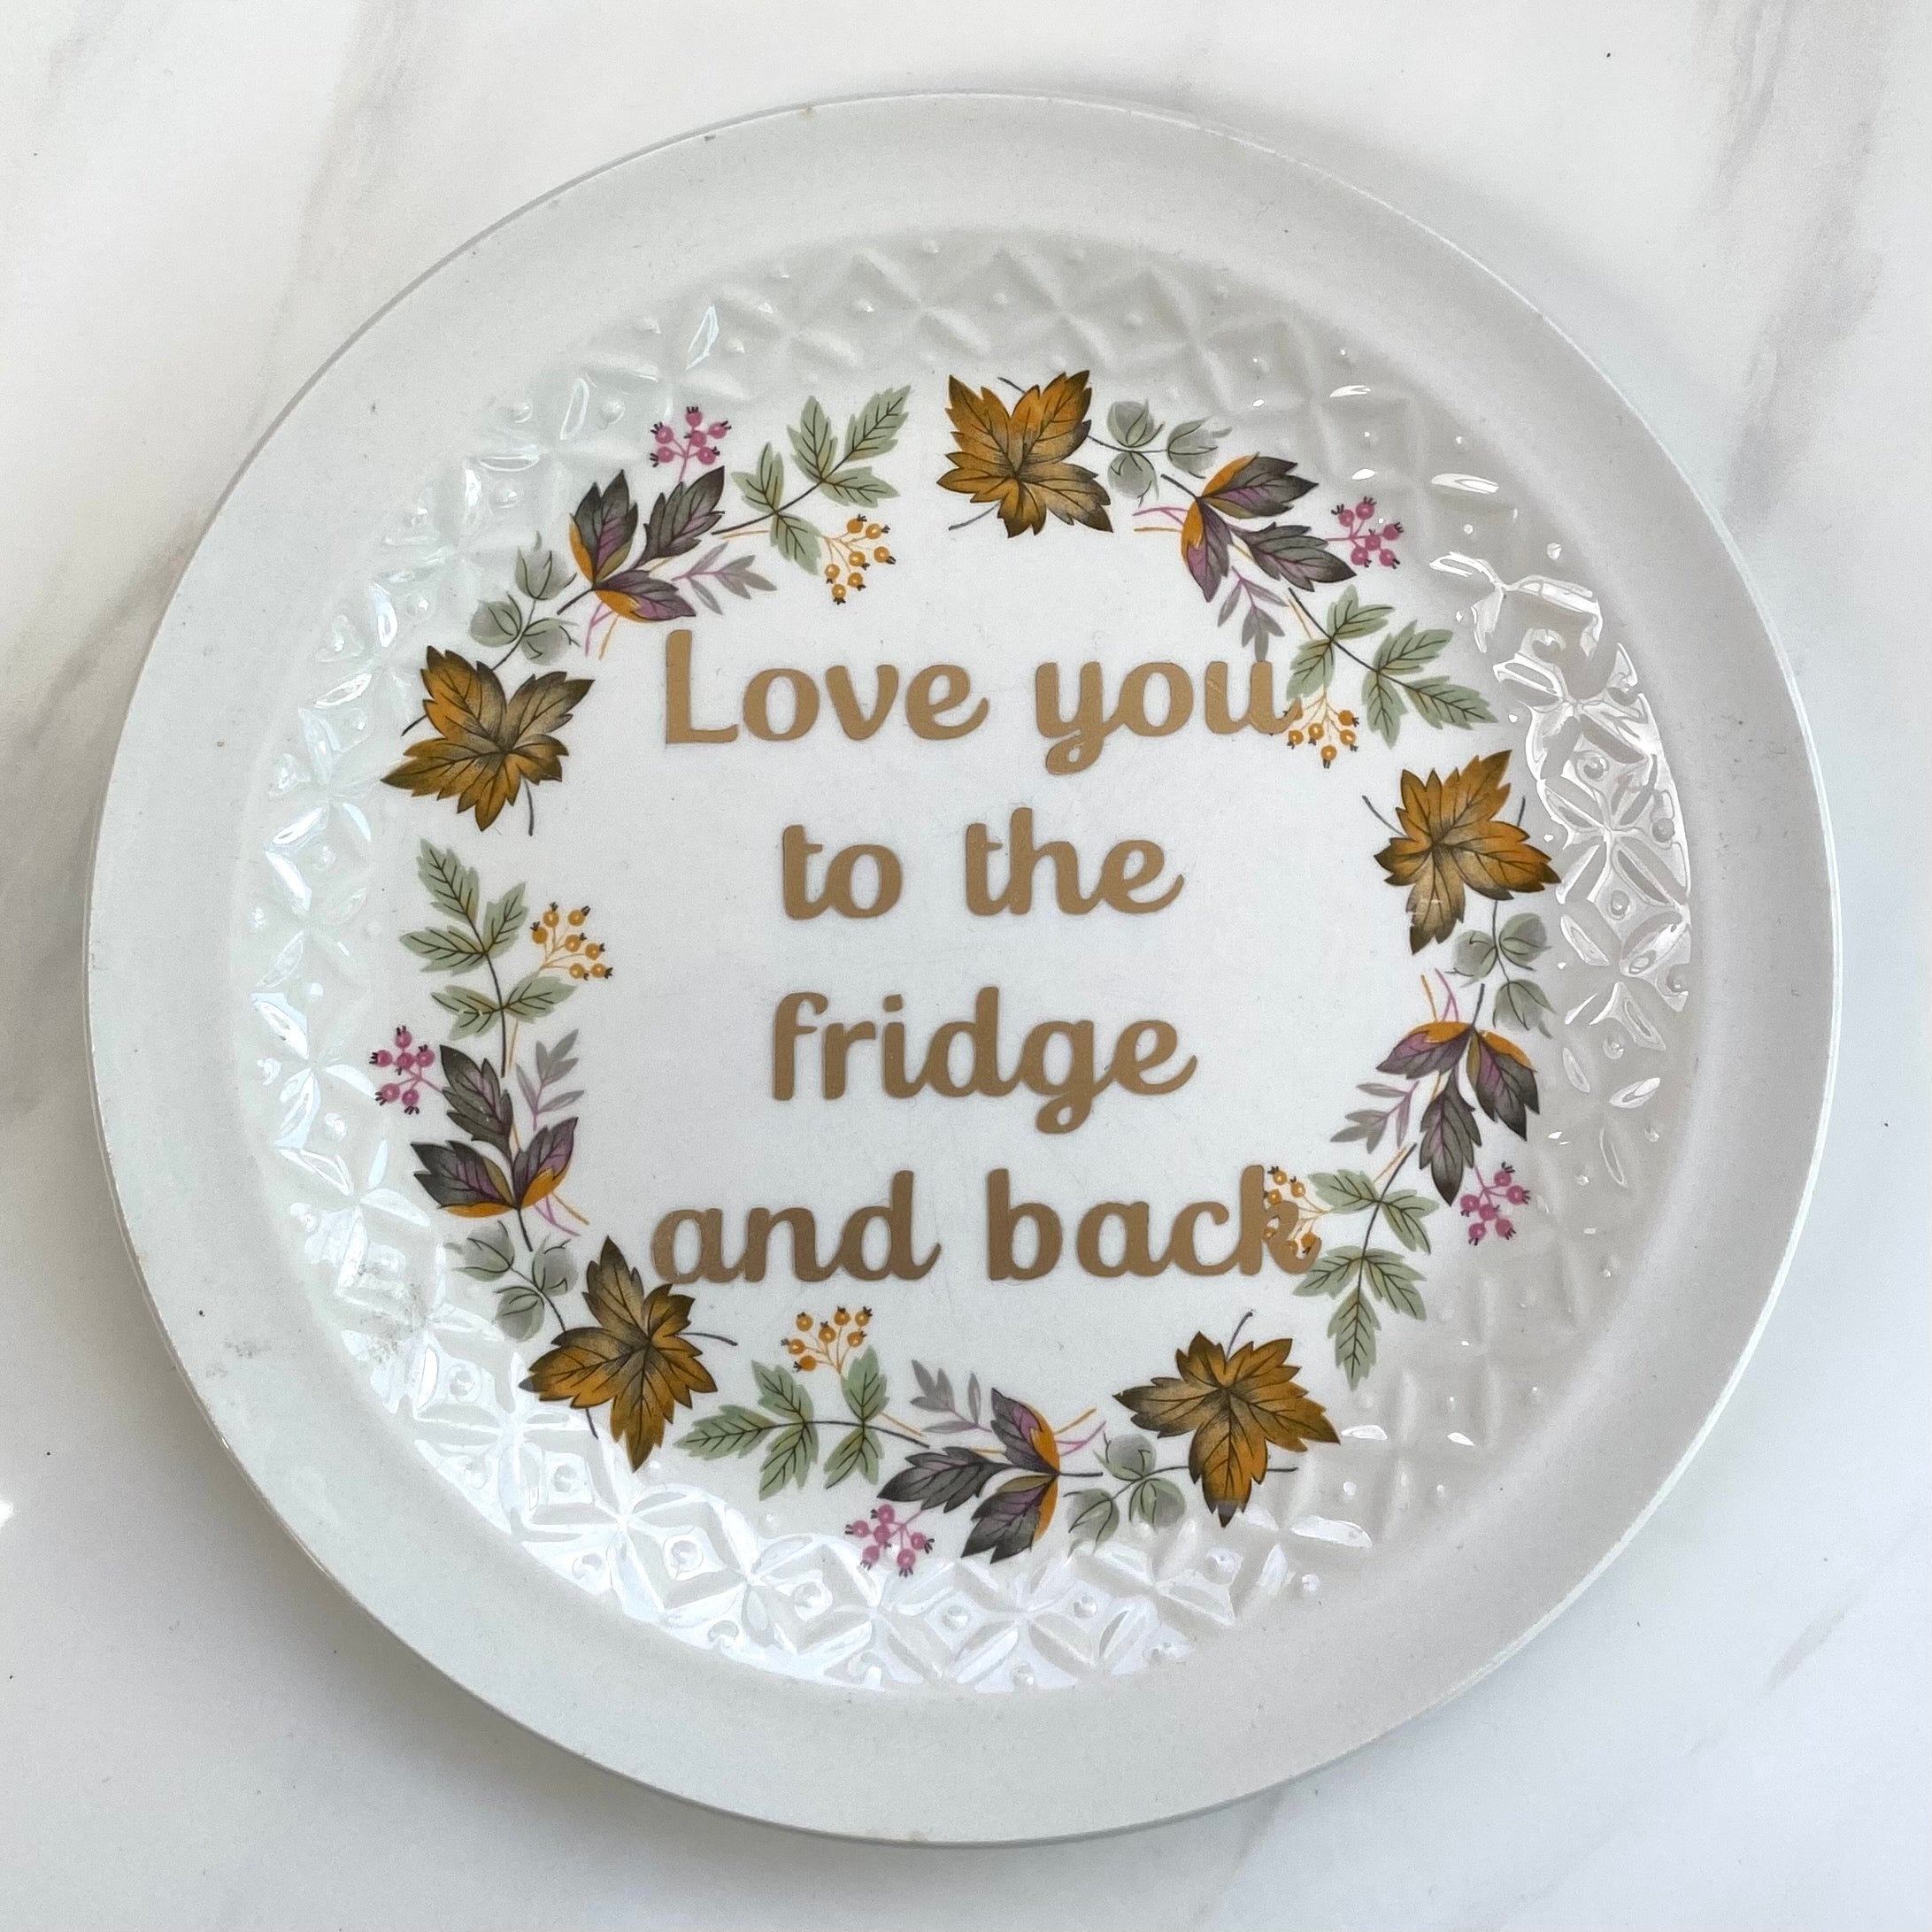 ‘Love you to the fridge and back’ quote on plate